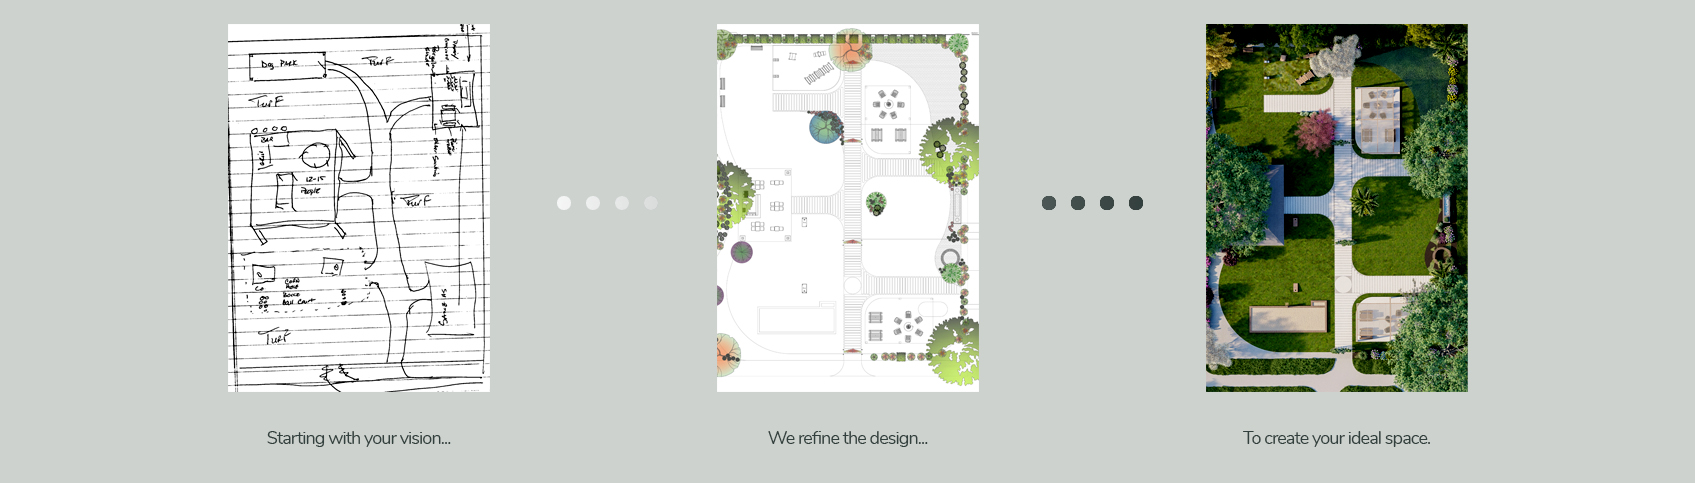 Evolution of a landscape design from initial sketch to detailed plan and finished garden space